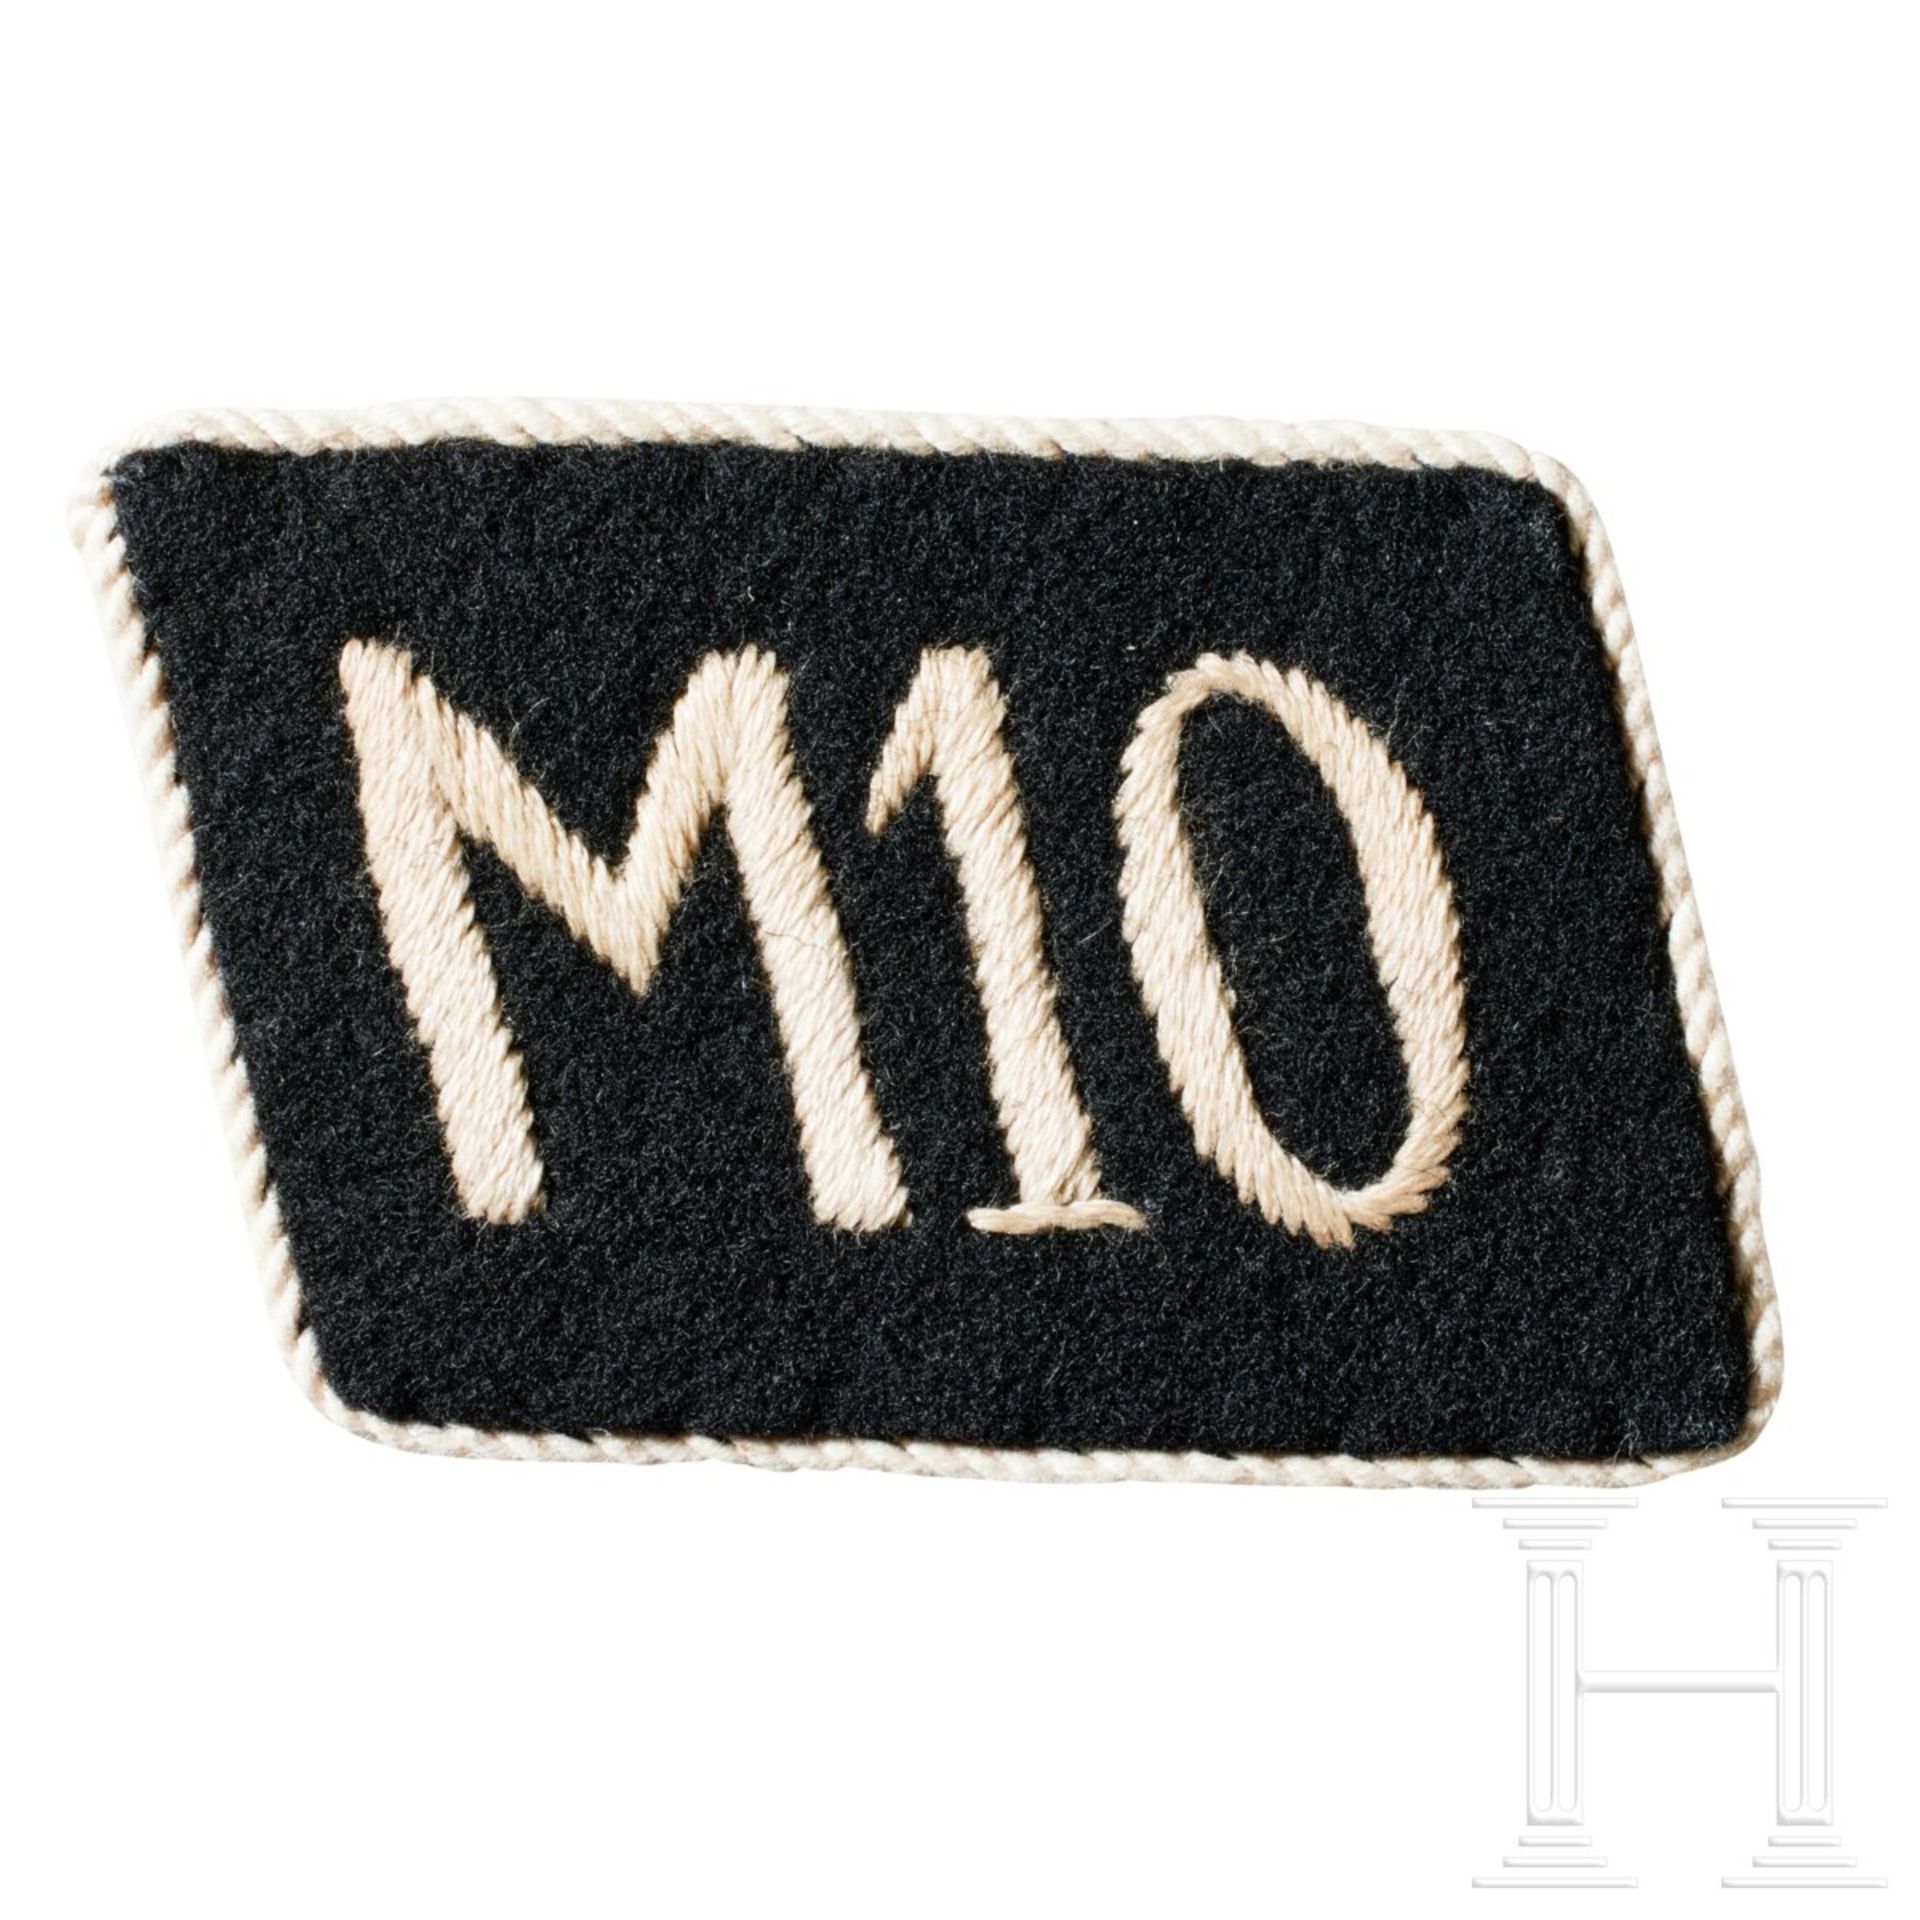 A Right Collar Tab for SS Motor Transport Company 10 "Südwest"